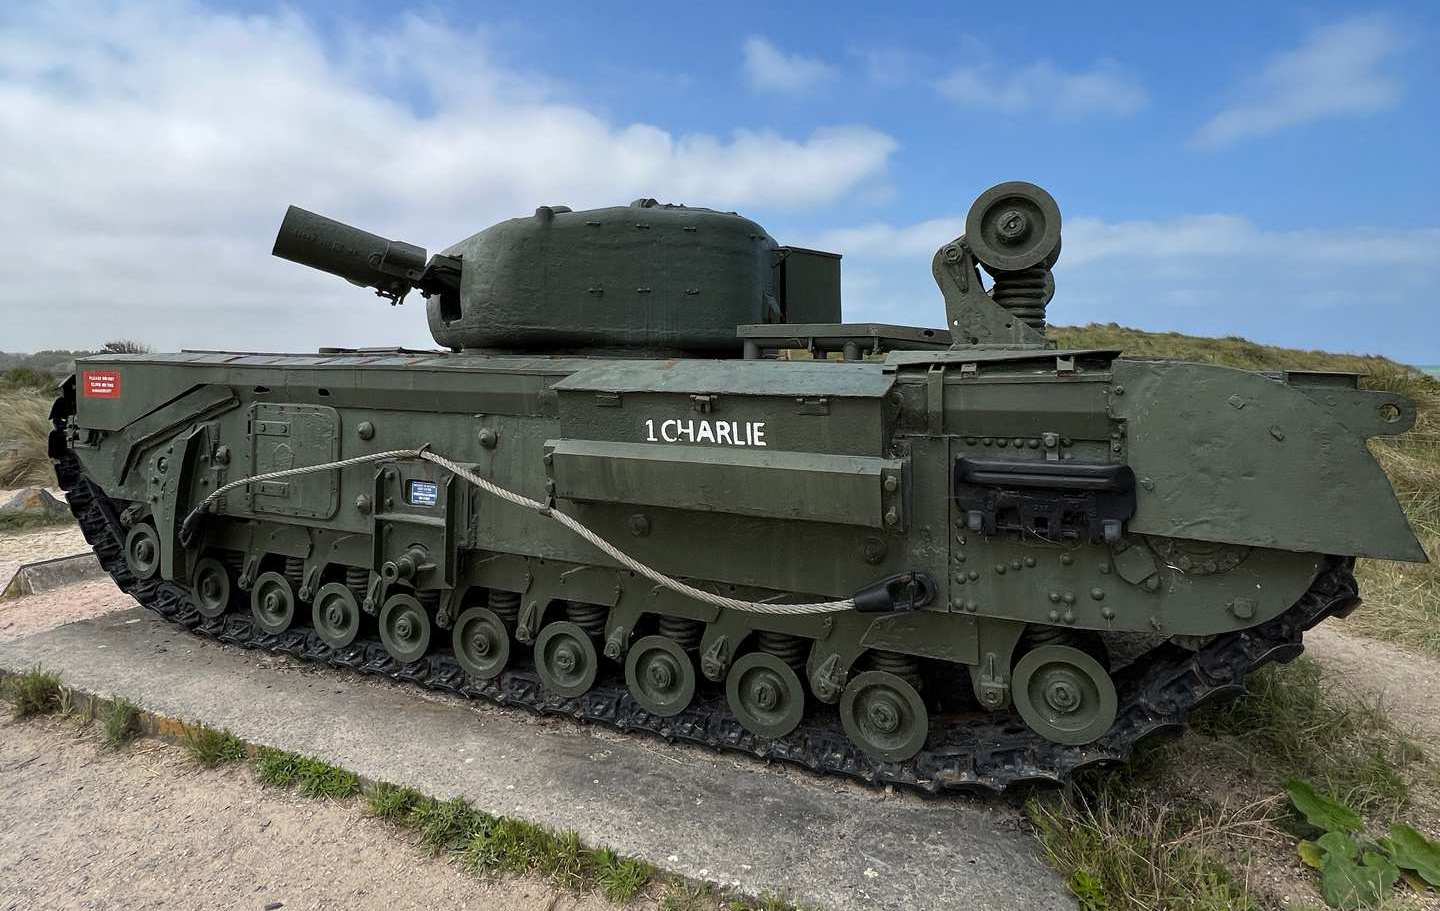 Charlie tank in Juno Beach Museum in Normandy, France. Is there any such thing as a good beach in Normandy?